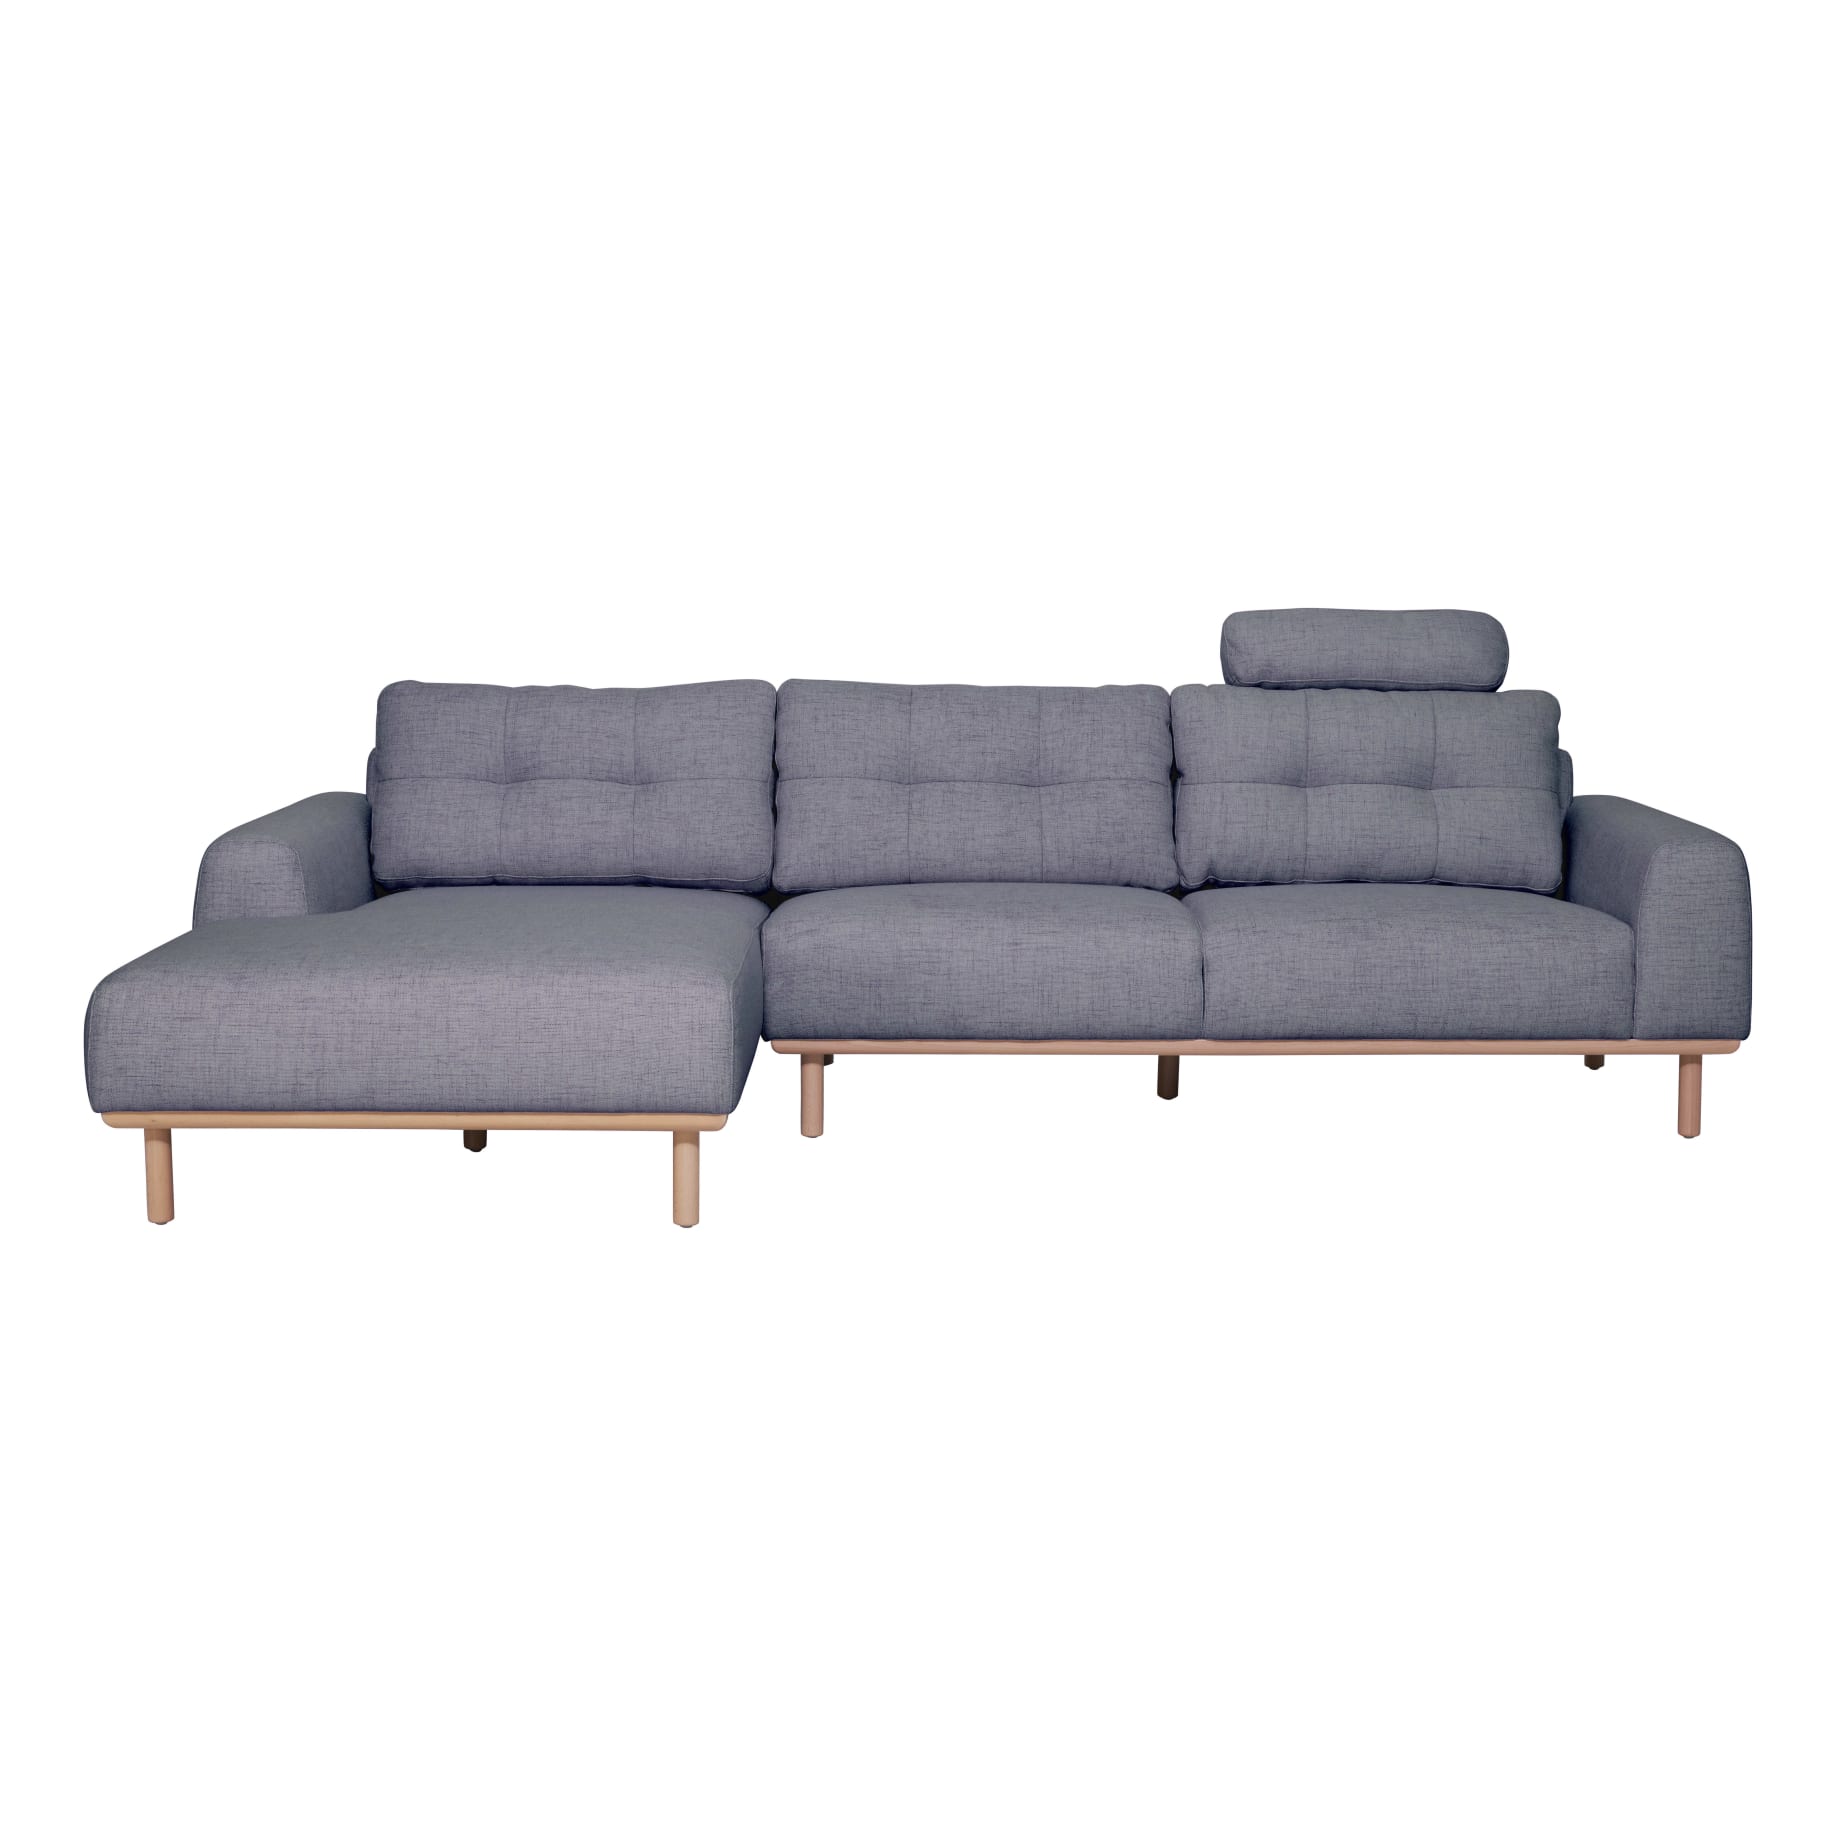 Stratton 3 Seater+Chaise LHF in Cloud Pewter